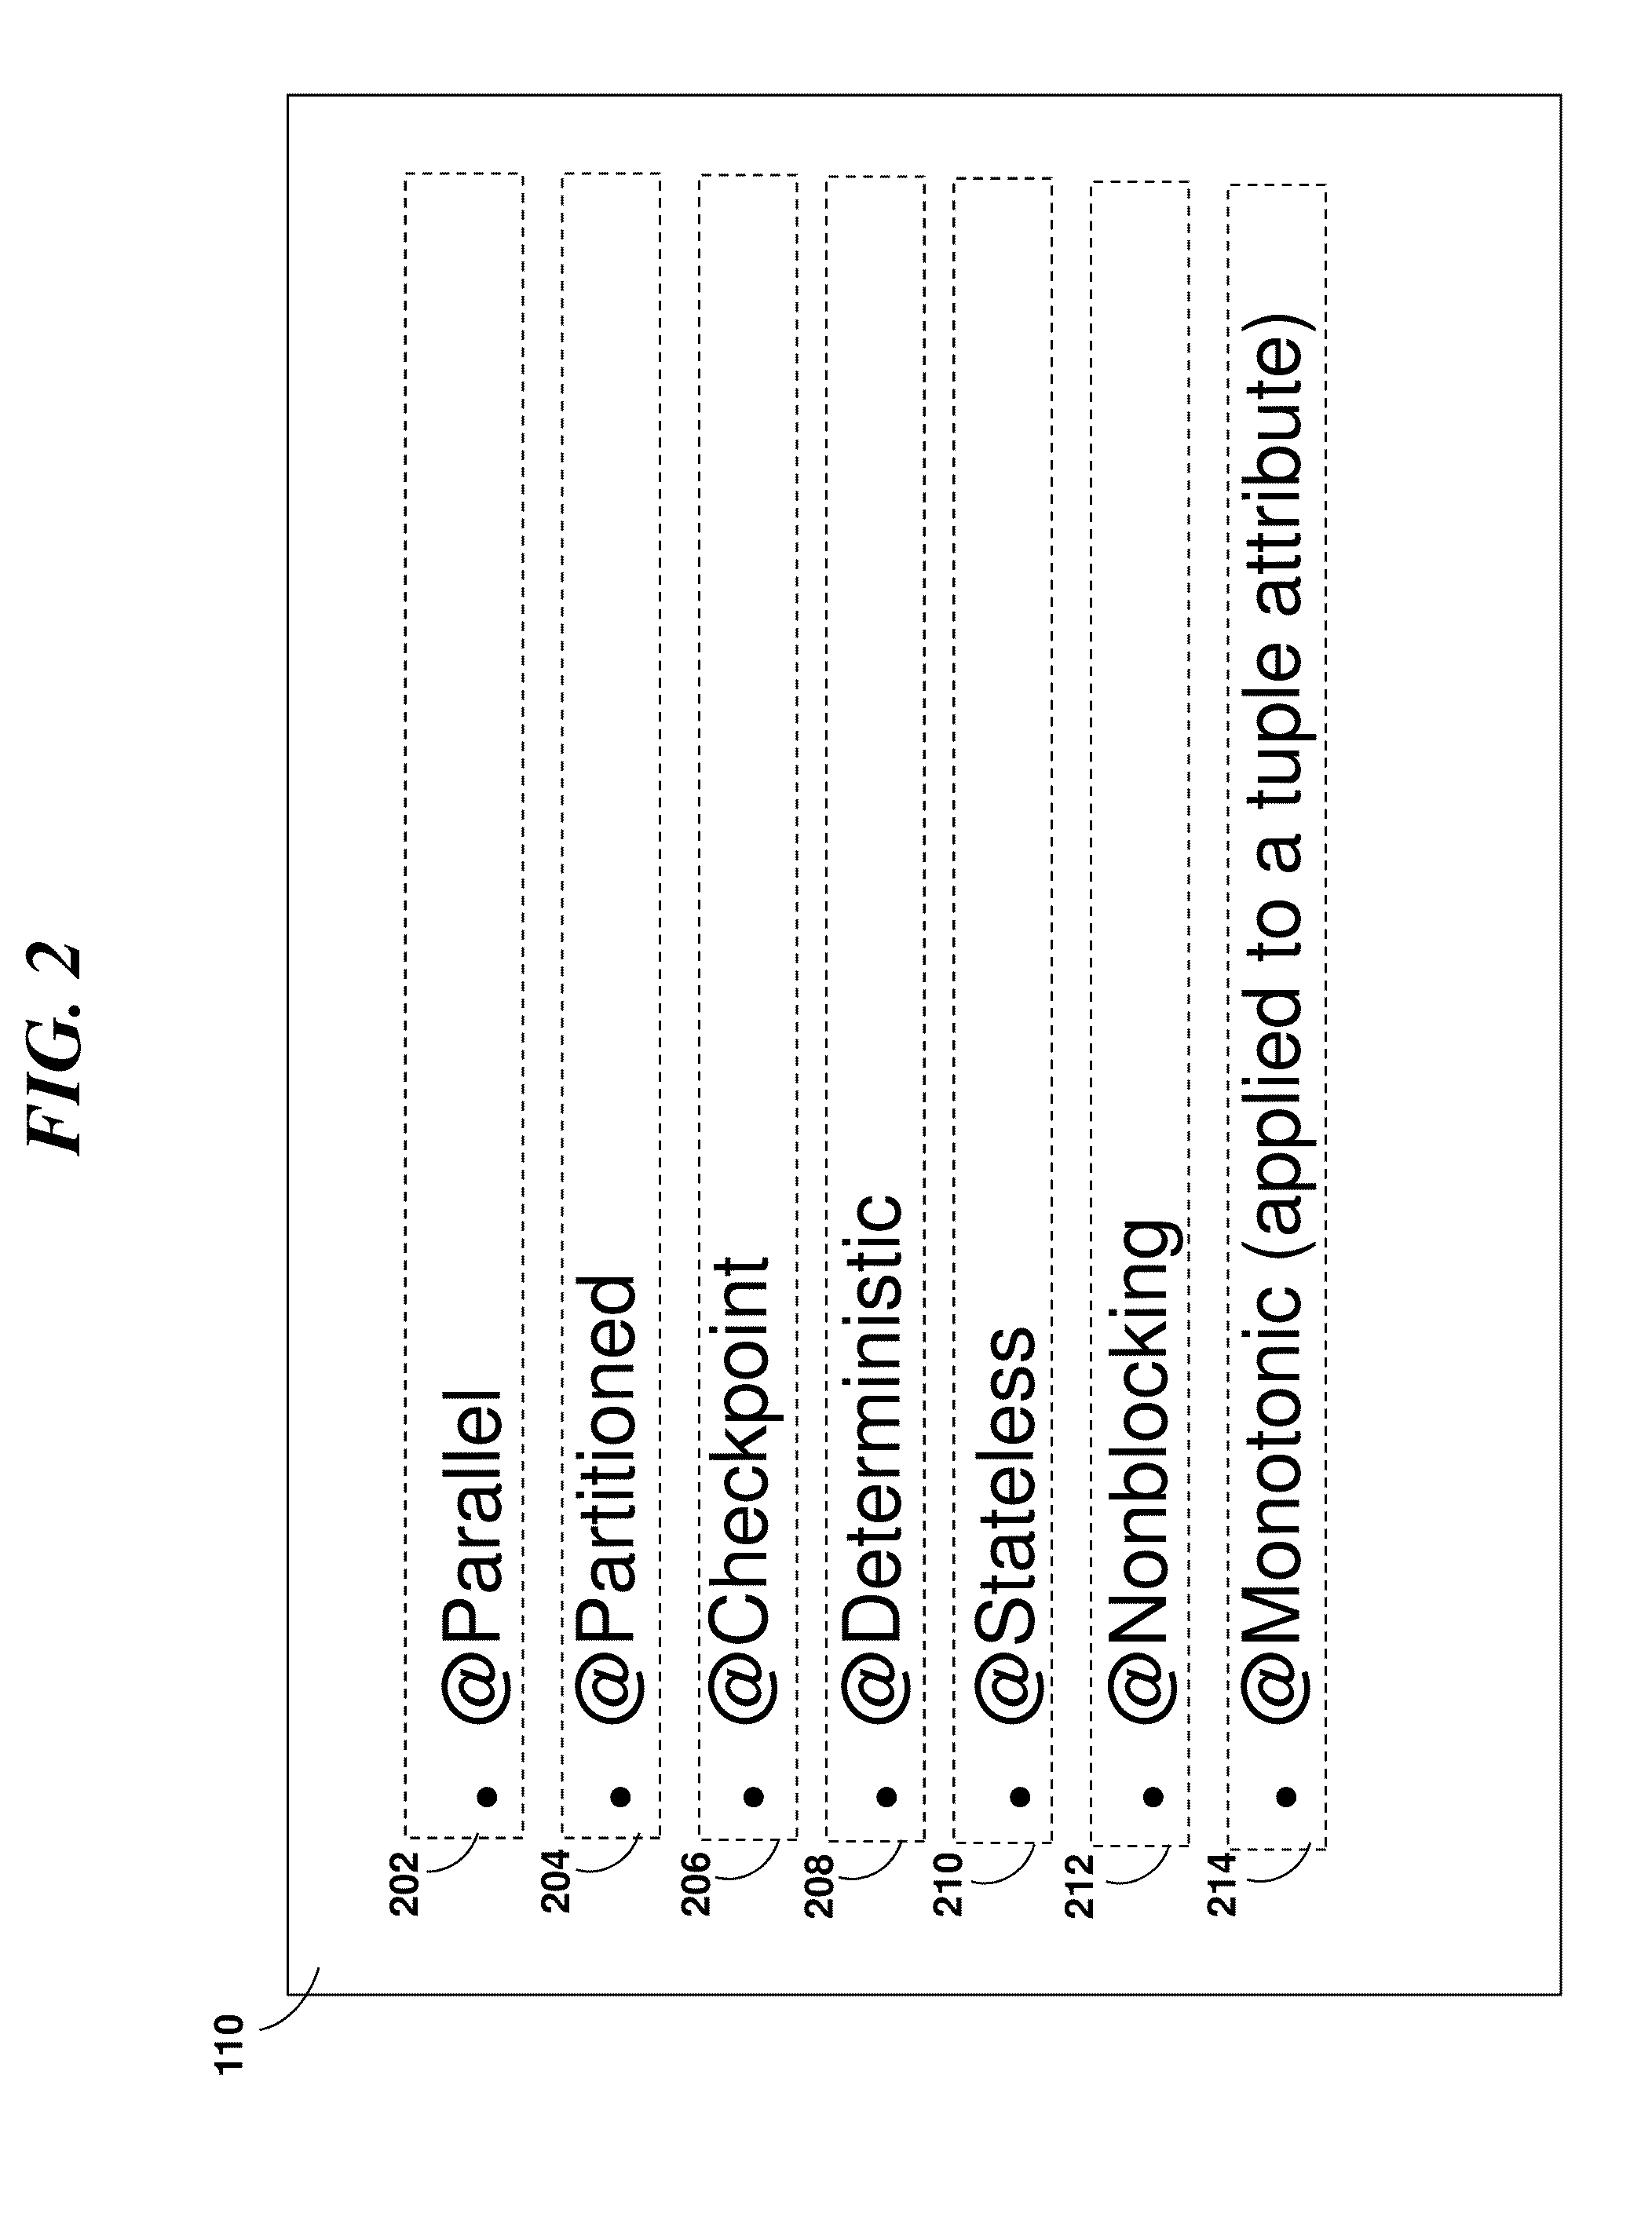 System and method for using development objectives to guide implementation of source code